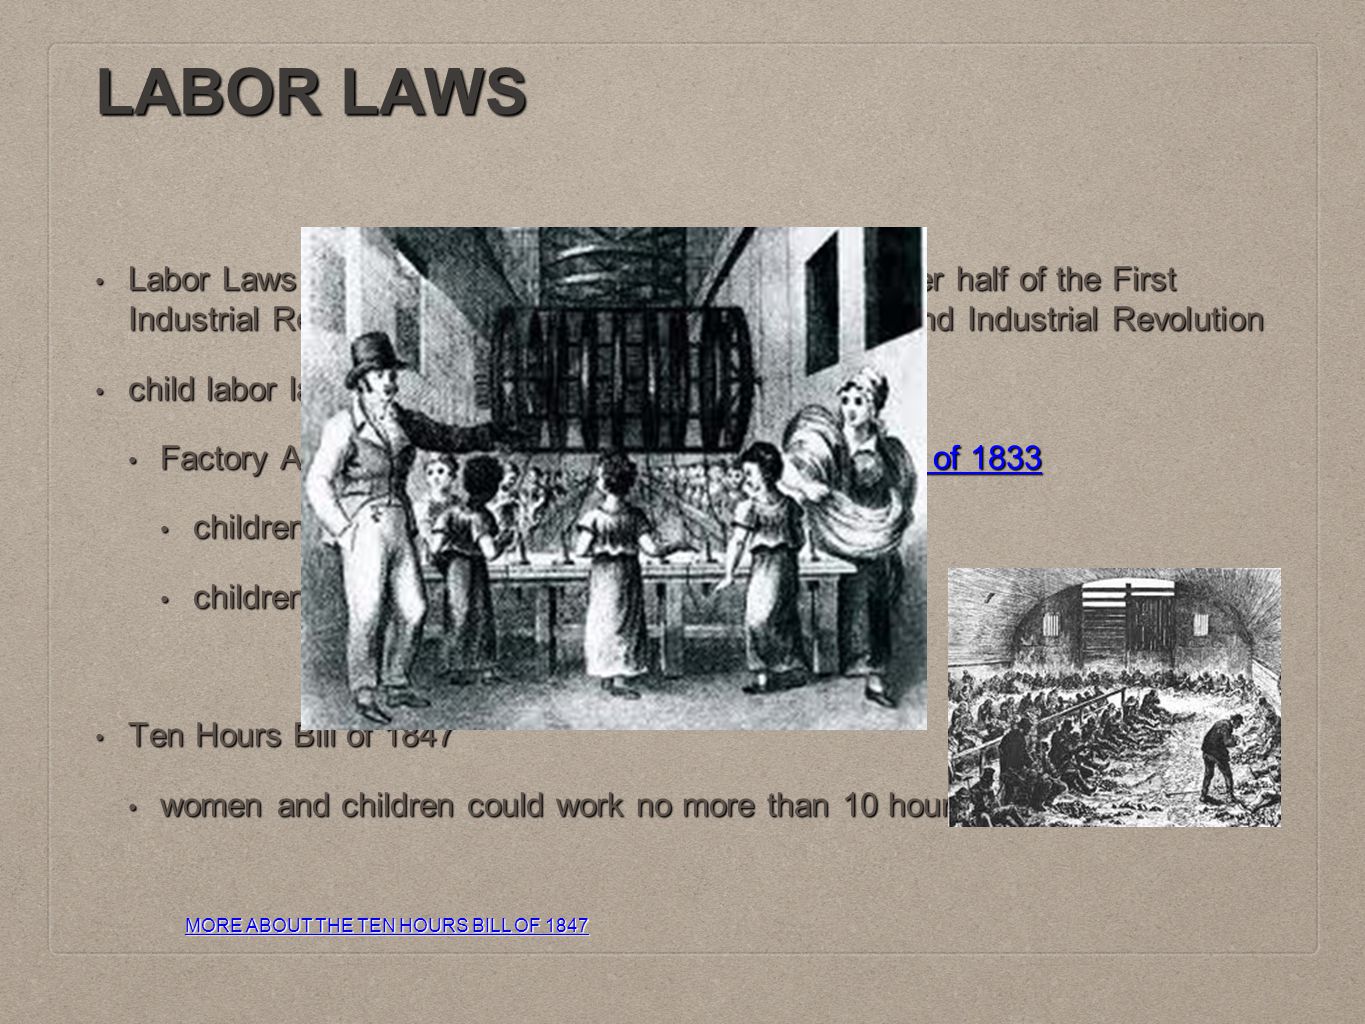 LABOR LAWS Labor Laws were more greatly enforced during the later half of the First Industrial Revolution, and for the majority of the Second Industrial Revolution Labor Laws were more greatly enforced during the later half of the First Industrial Revolution, and for the majority of the Second Industrial Revolution child labor laws child labor laws Factory Act of 1833read more about the Factory act of 1833 Factory Act of 1833read more about the Factory act of 1833read more about the Factory act of 1833read more about the Factory act of 1833 children 9 to 13 years old could only work 8 hours children 9 to 13 years old could only work 8 hours children under 9 years old could not work children under 9 years old could not work Ten Hours Bill of 1847 Ten Hours Bill of 1847 women and children could work no more than 10 hours a day women and children could work no more than 10 hours a day MORE ABOUT THE TEN HOURS BILL OF 1847 MORE ABOUT THE TEN HOURS BILL OF 1847